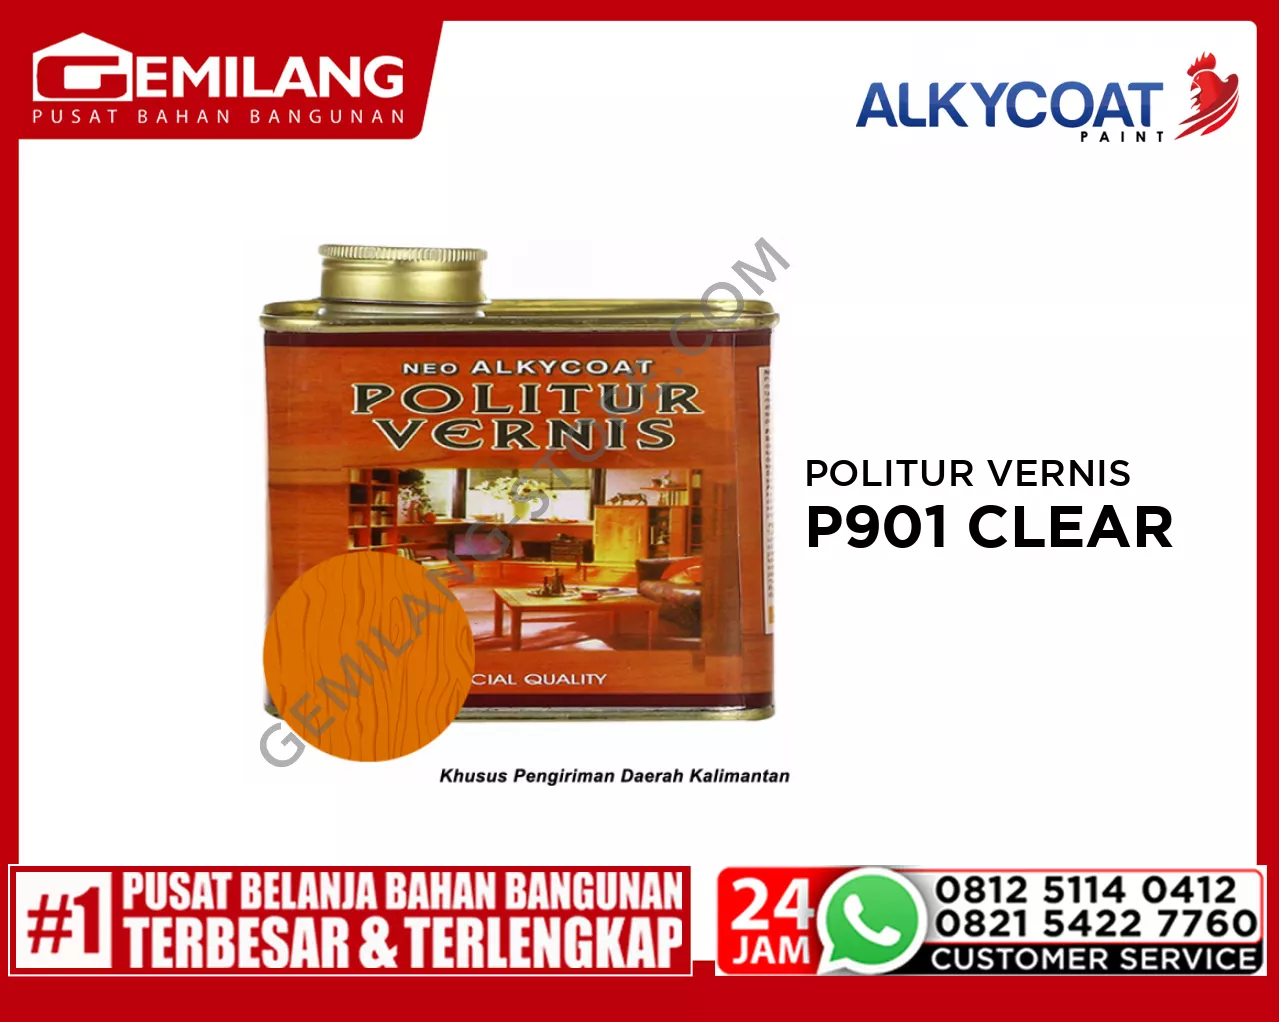 NEO ALKYCOAT POLITUR VERNIS P901 CLEAR/TRANS 0.5ltr